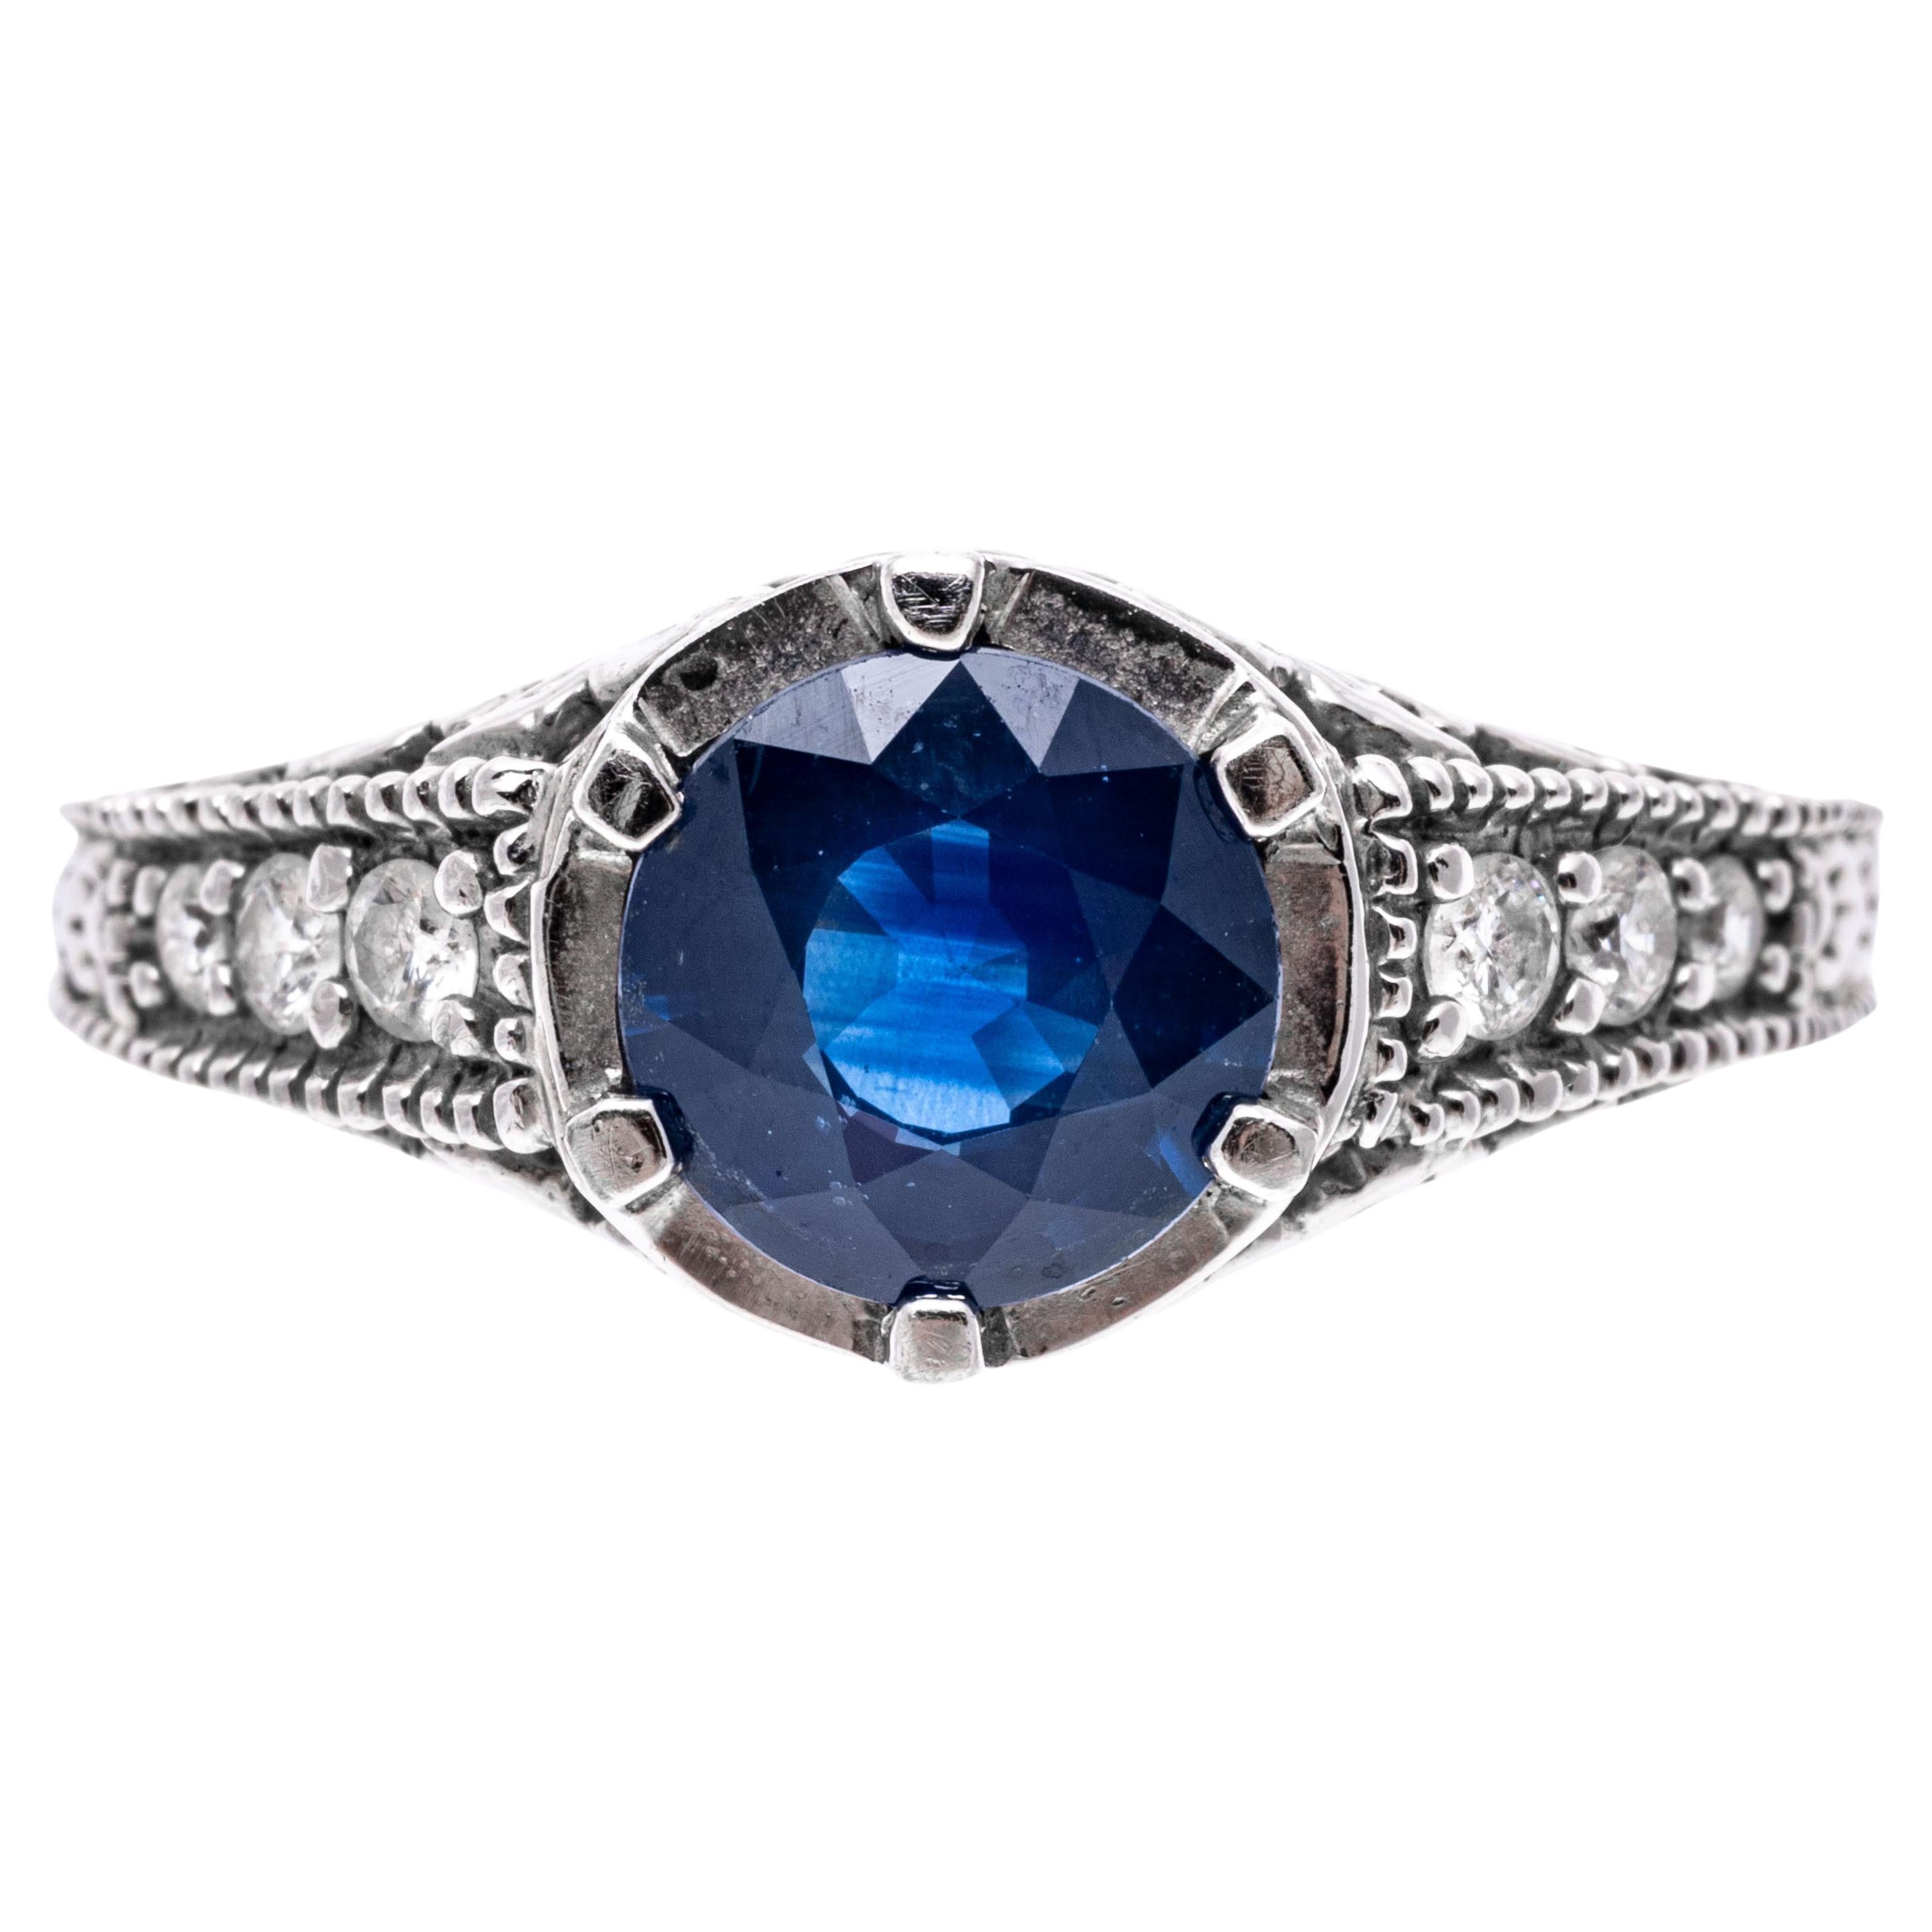 14k White Gold Round Blue Sapphire, 1.44 CTS and Diamond Ring